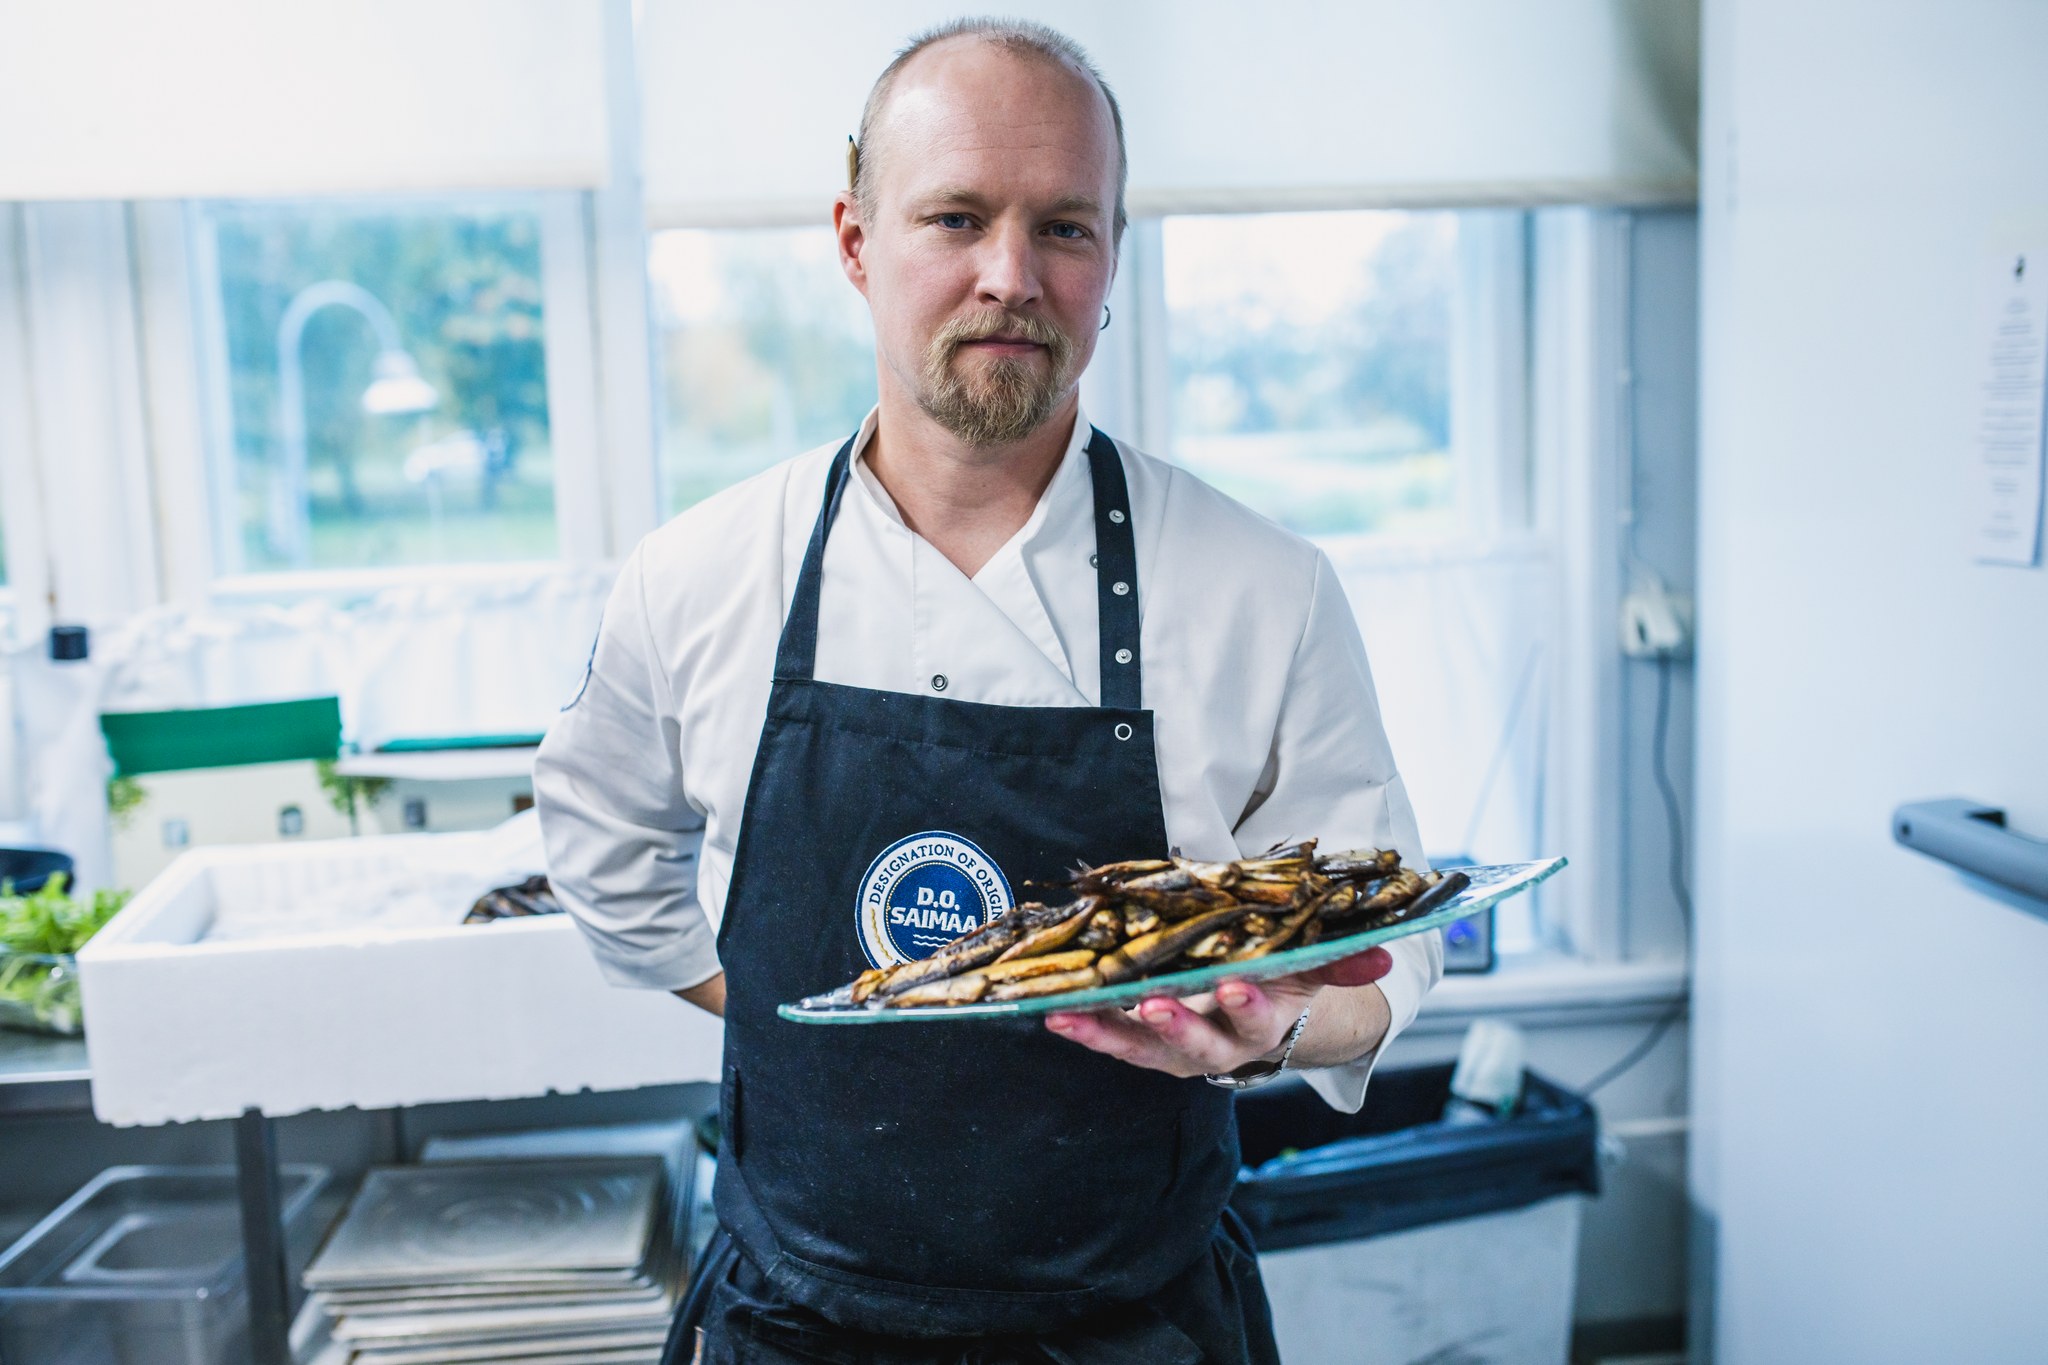 Watch the video for top chef Ilkka Arvola's best tips for making D.O. Saimaa treats.